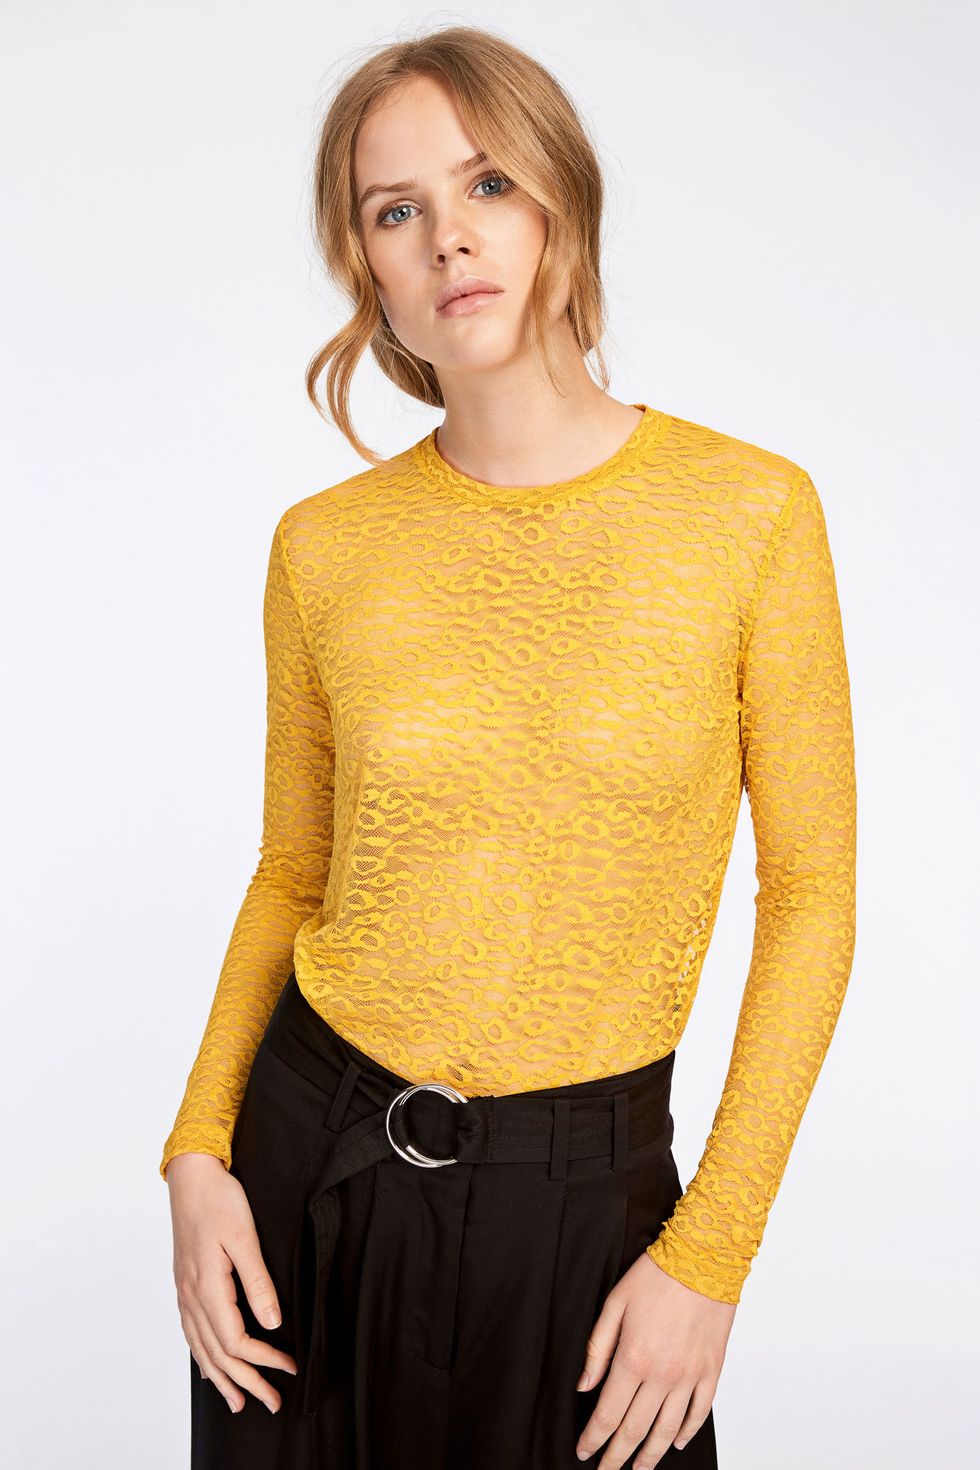 Clothing, Yellow, Neck, Sleeve, Shoulder, Photo shoot, Top, Blouse, Outerwear, Sweater, 